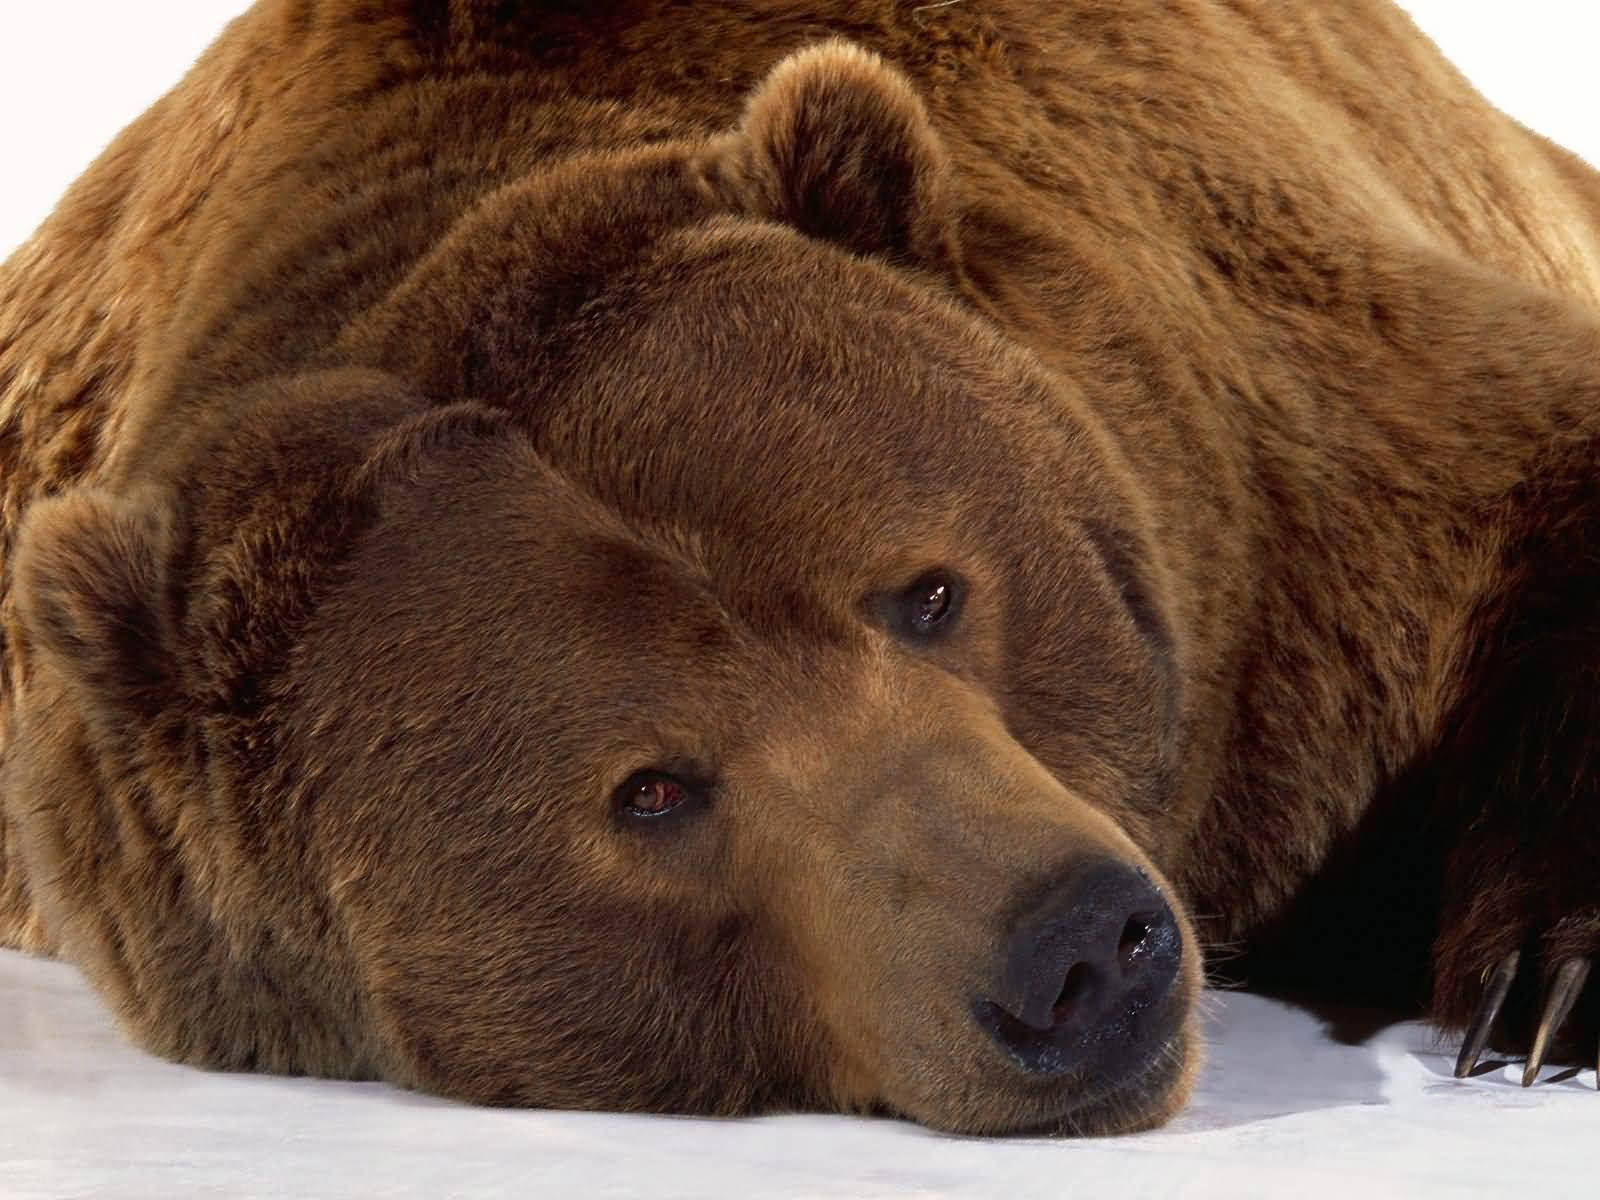 Close-up Photograph Of Grizzly Bear Background